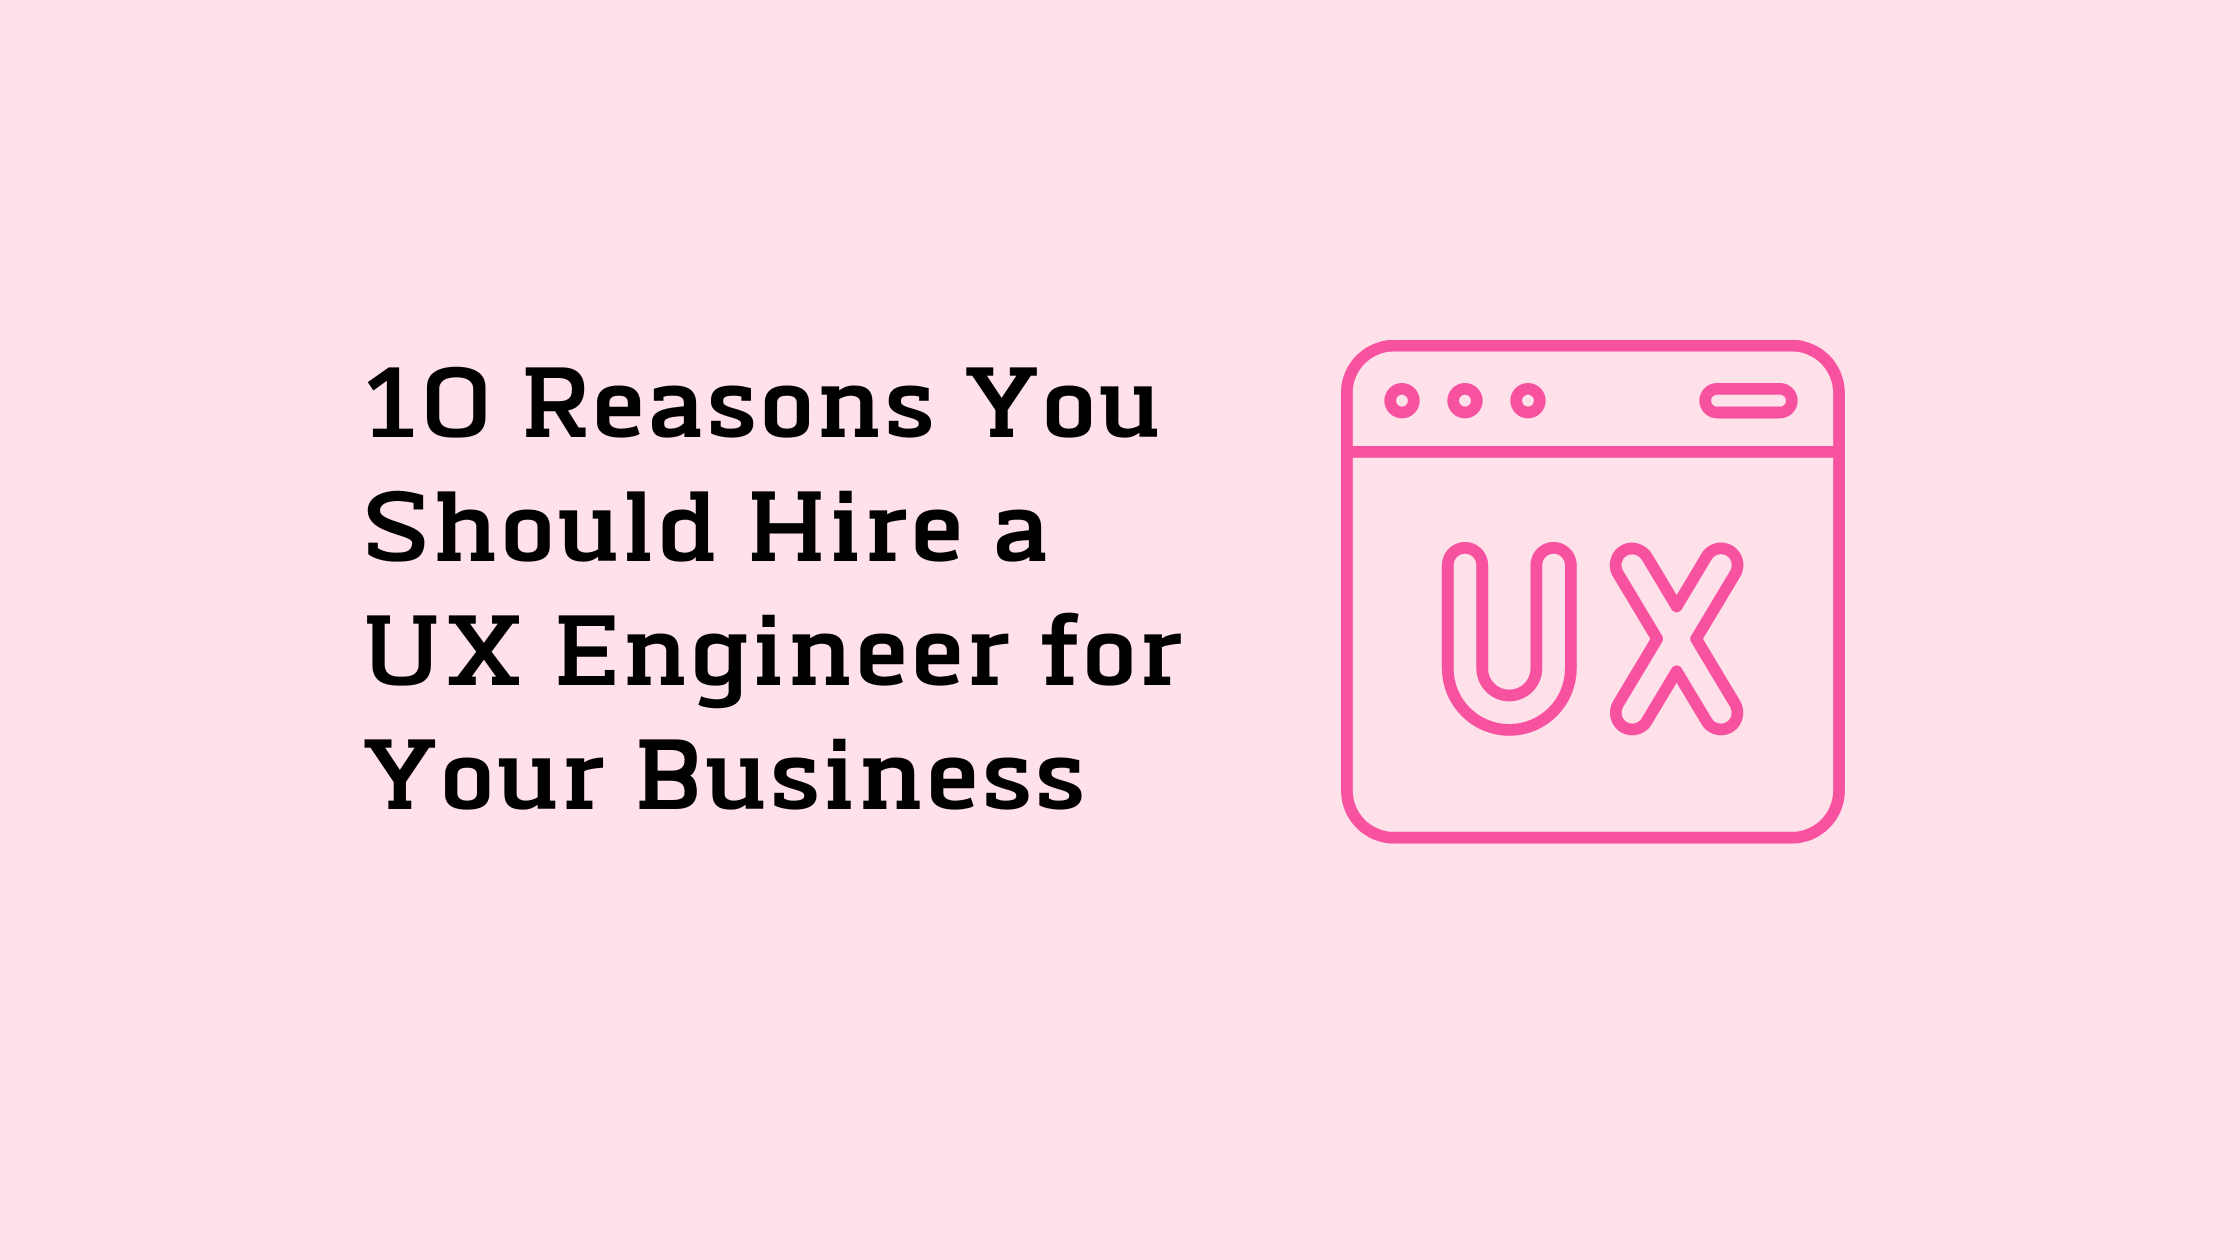 10 Reasons You Should Hire a UX Engineer for Your Business